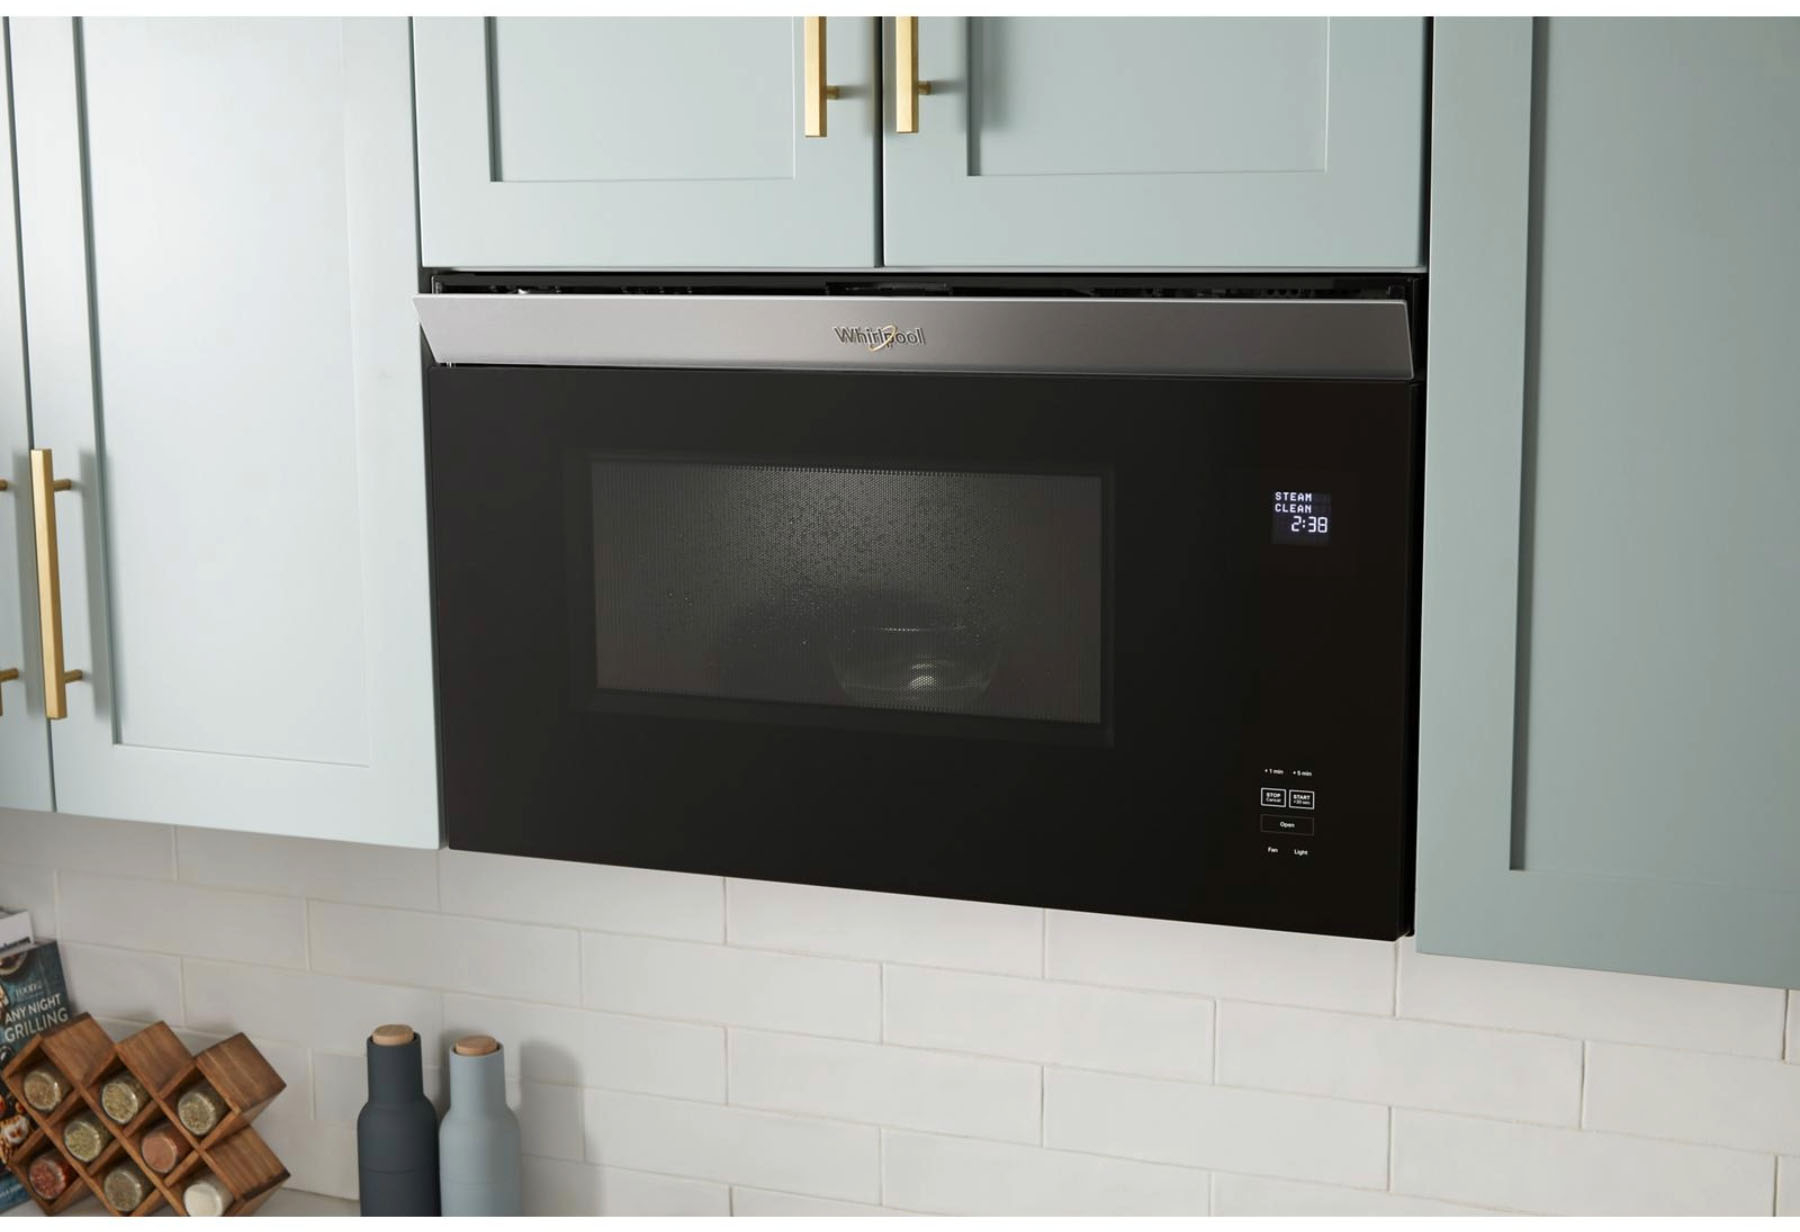 1.1 Cu. Ft. Over-the-Range Microwave with Flush Built-In Design